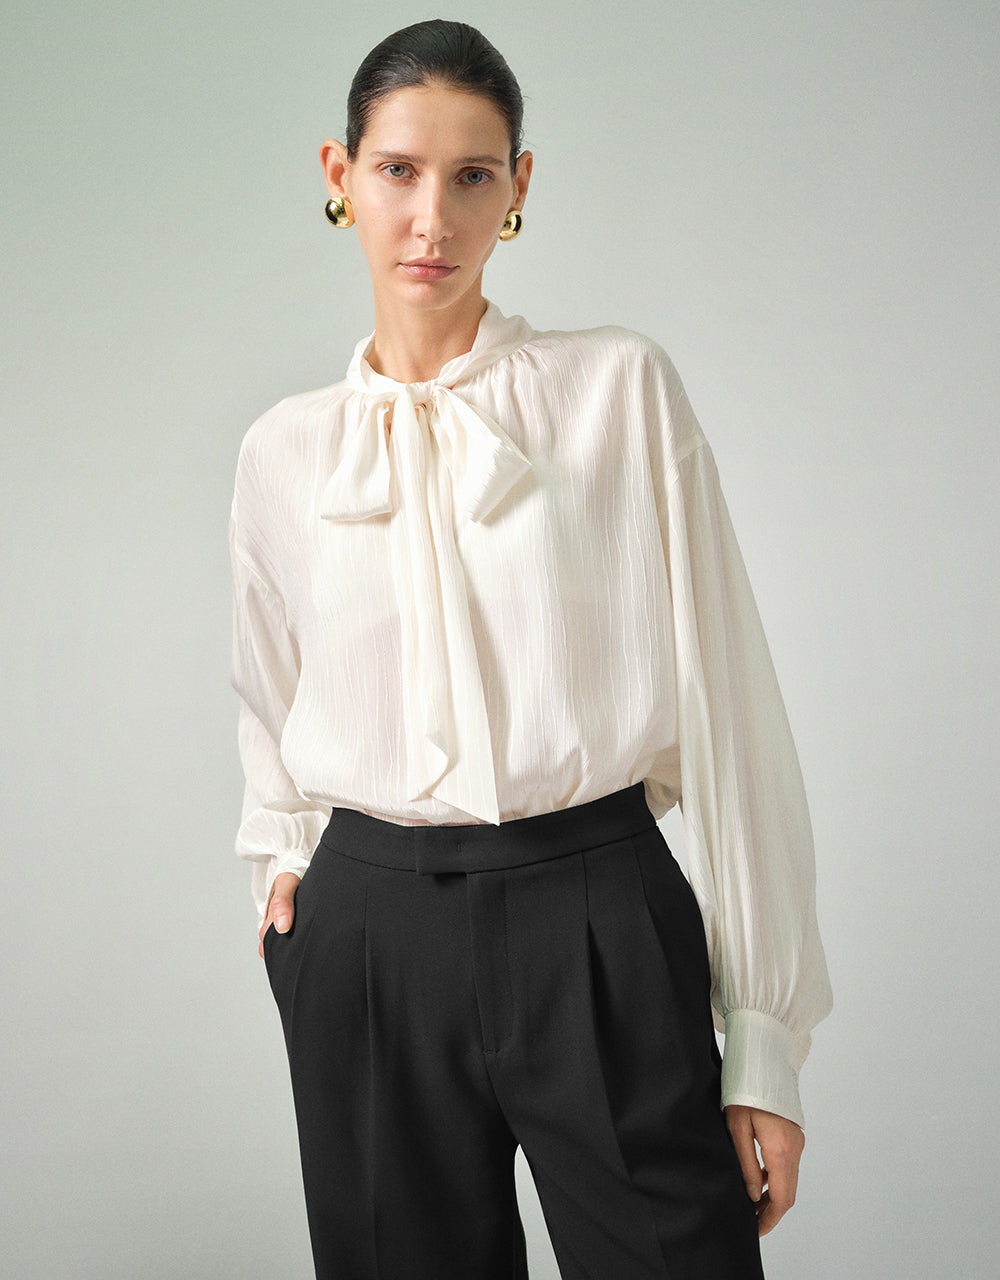 Bow Neck Overhead Shirt With Tie